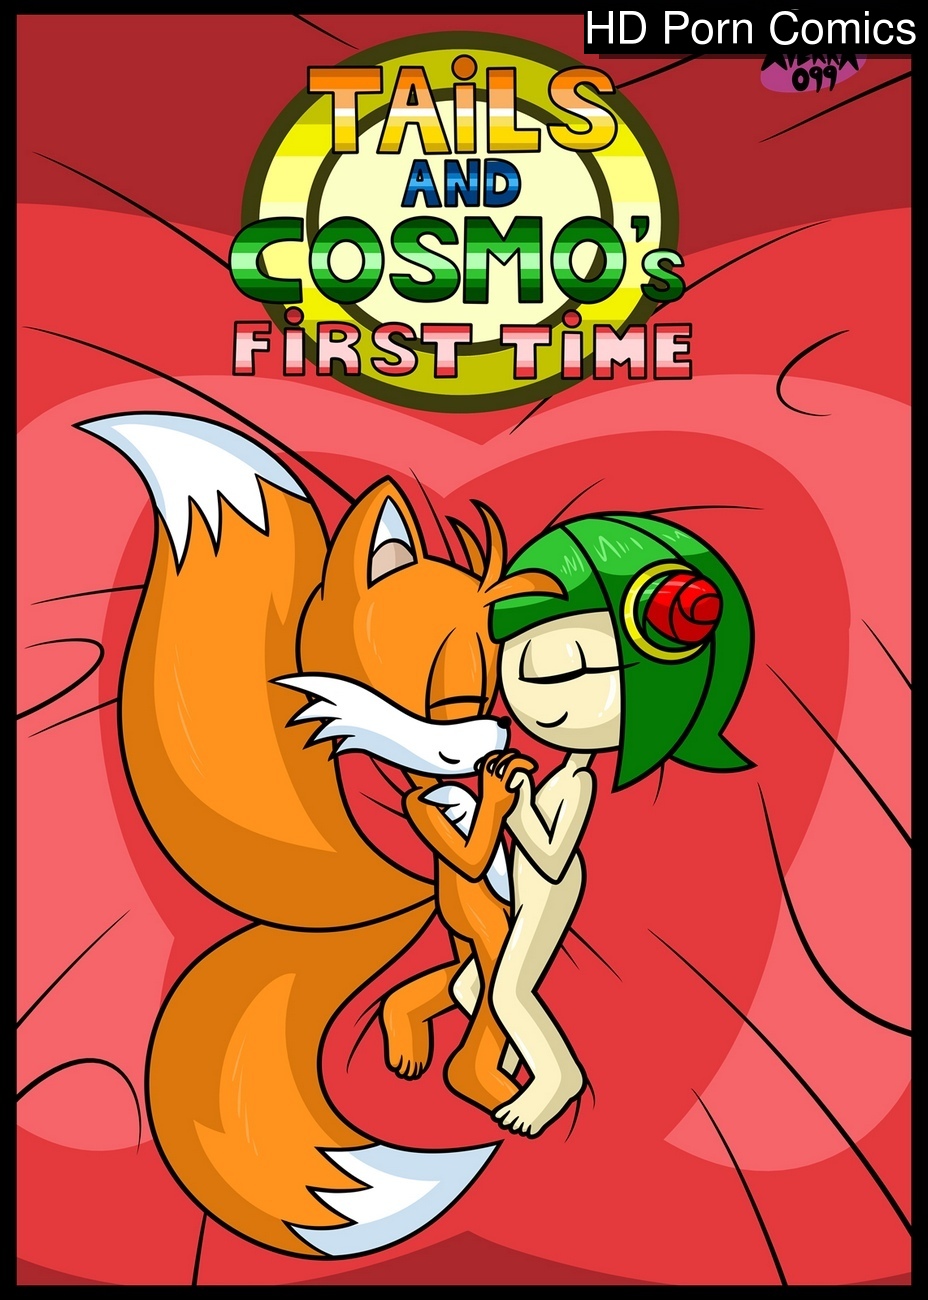 Tails x cosmo porn